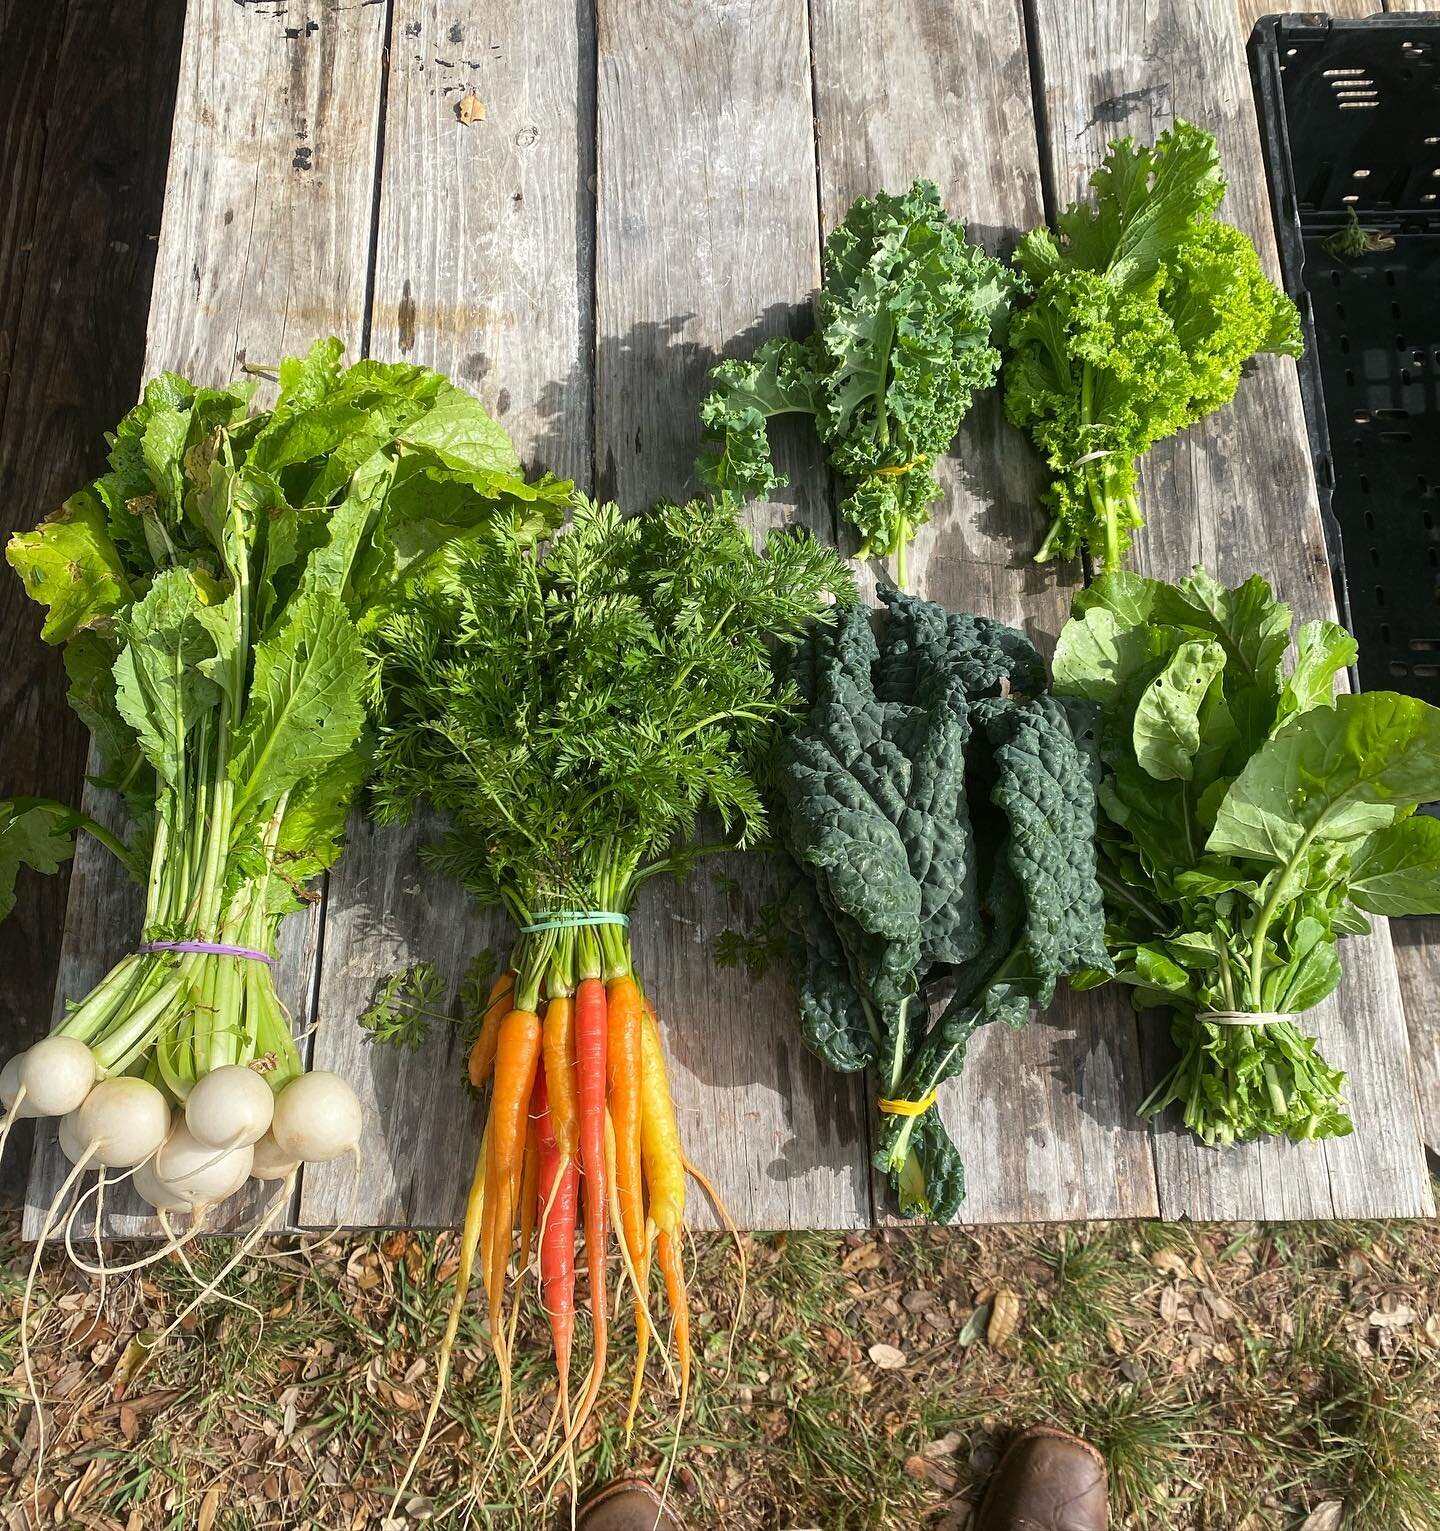 Join Our CSA Program for Fresh, Local Goodness! 🌿

Hey there, fellow food enthusiasts! 🥦🥕

At Hamilton Pool Farms, we invite you to join our Community Supported Agriculture (CSA) program! 🌾 What&rsquo;s better than enjoying farm-fresh, organic pr